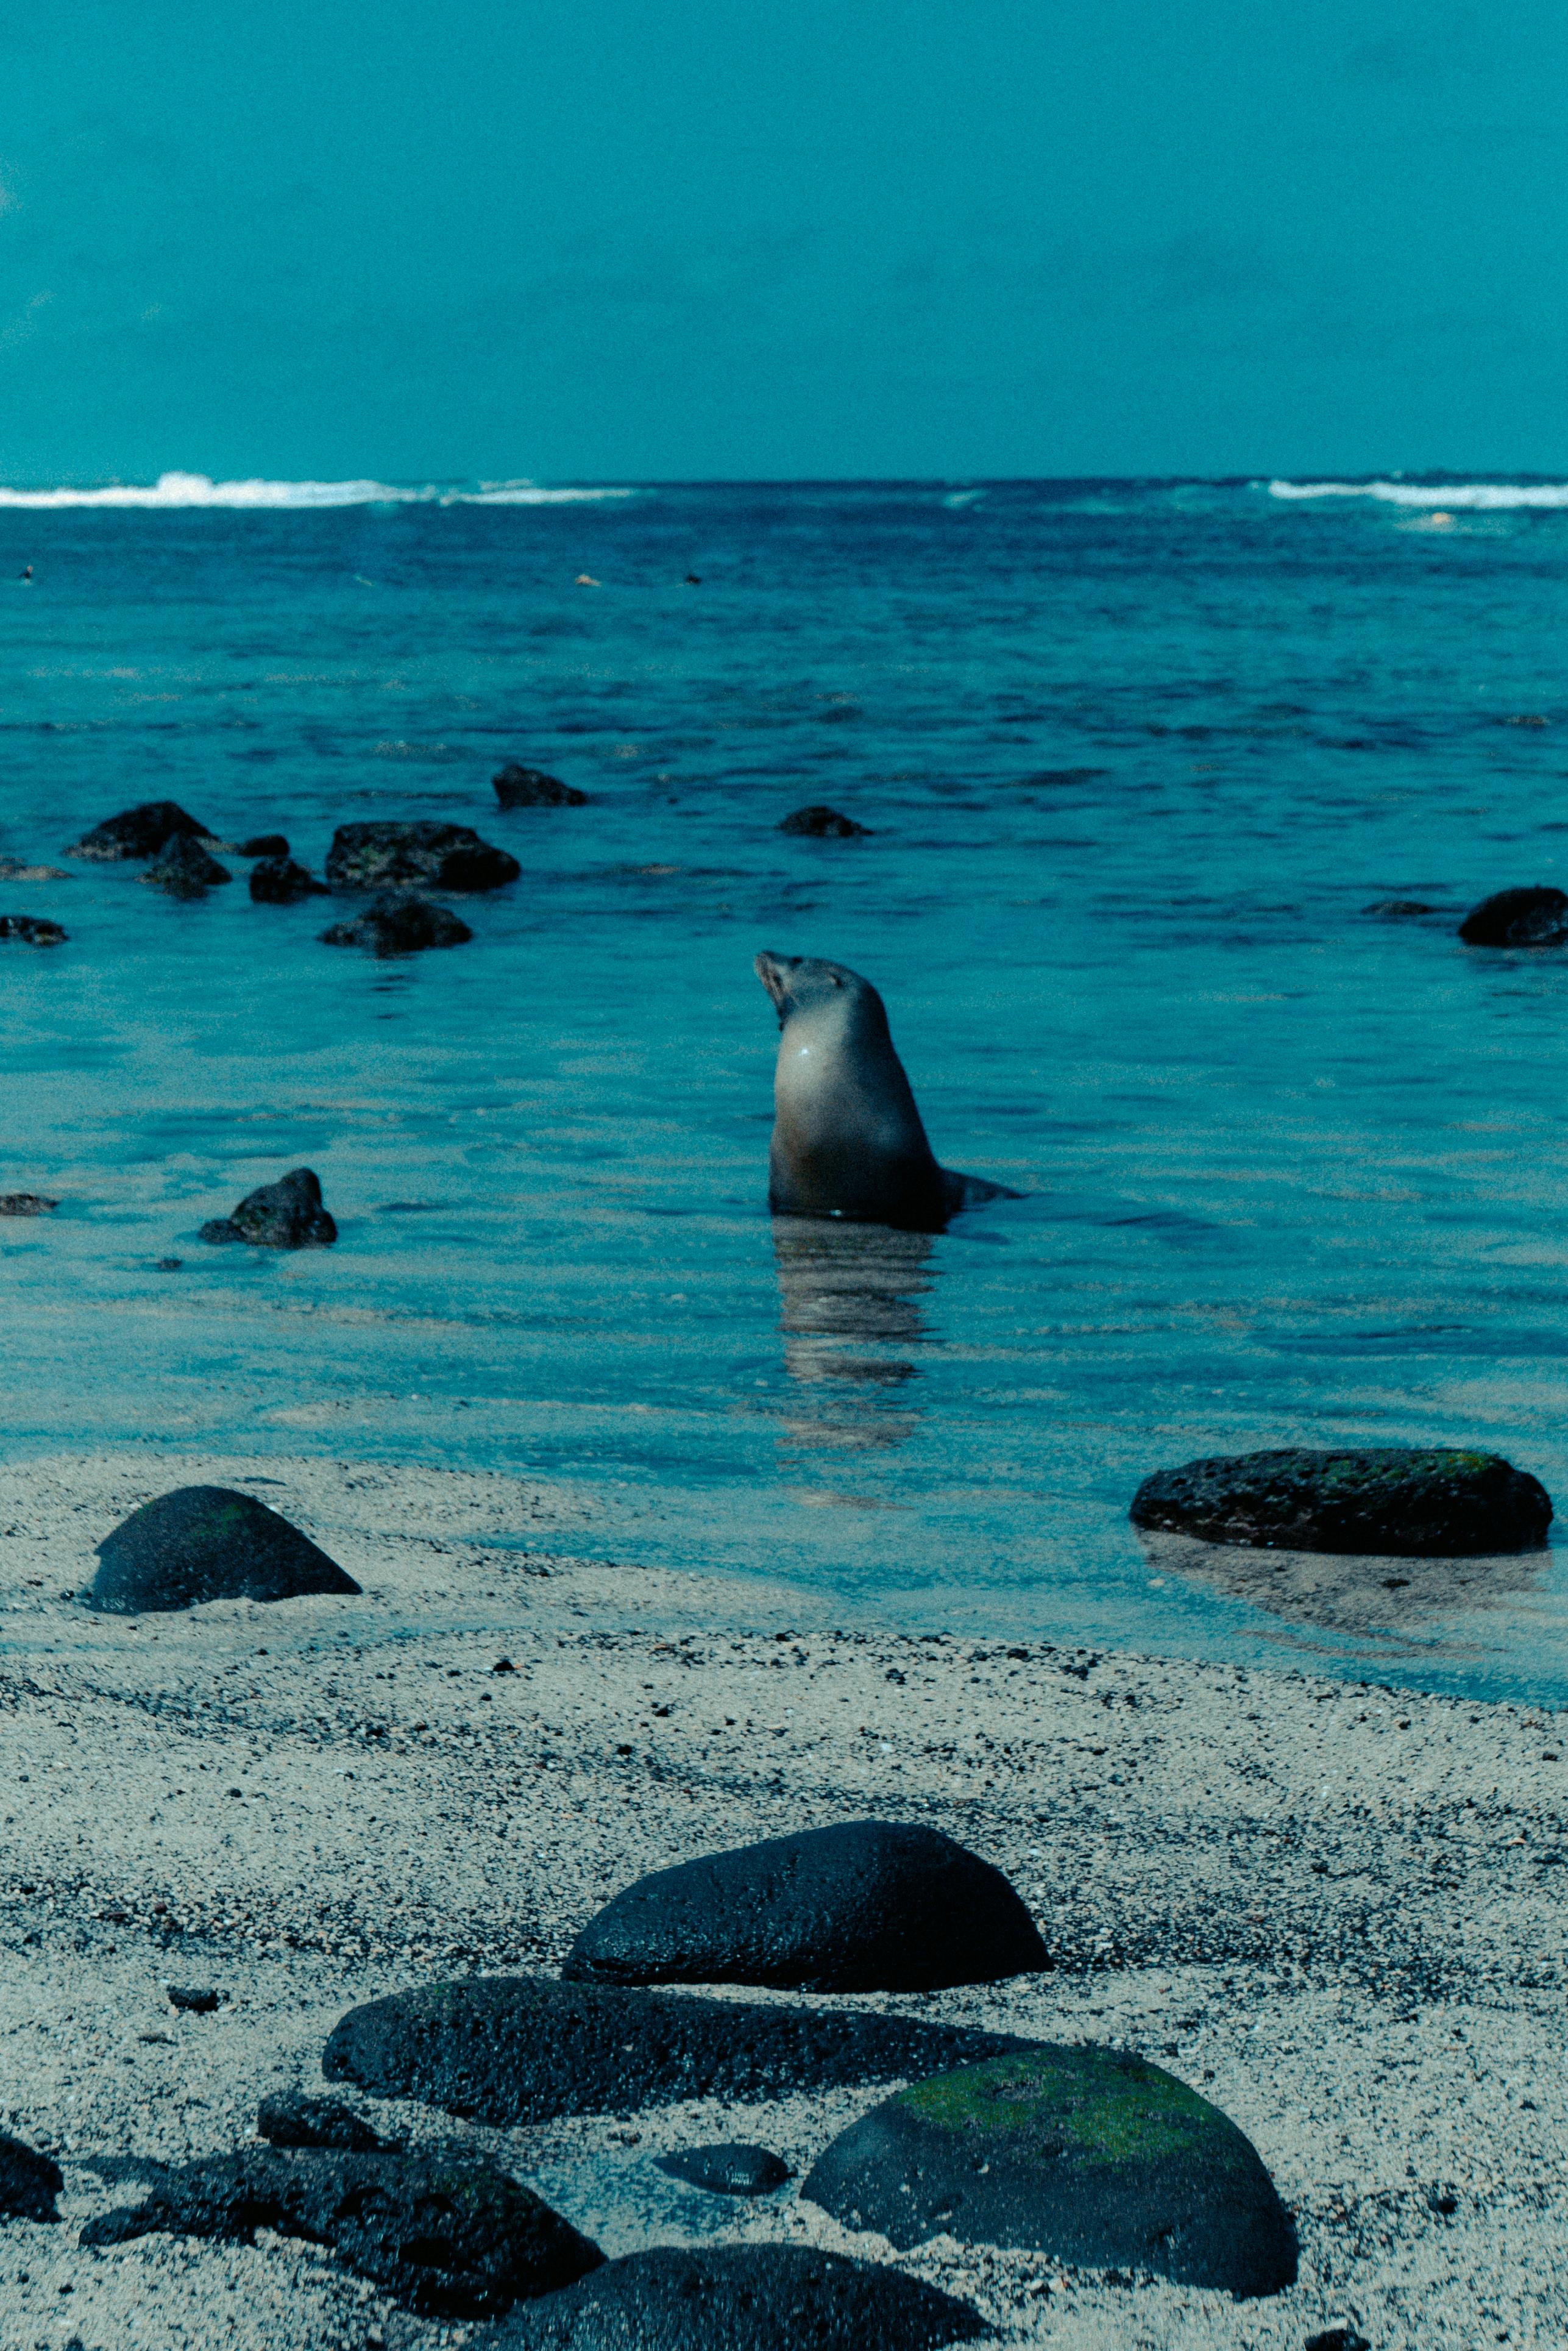 A Galapagos Sea Lion in water